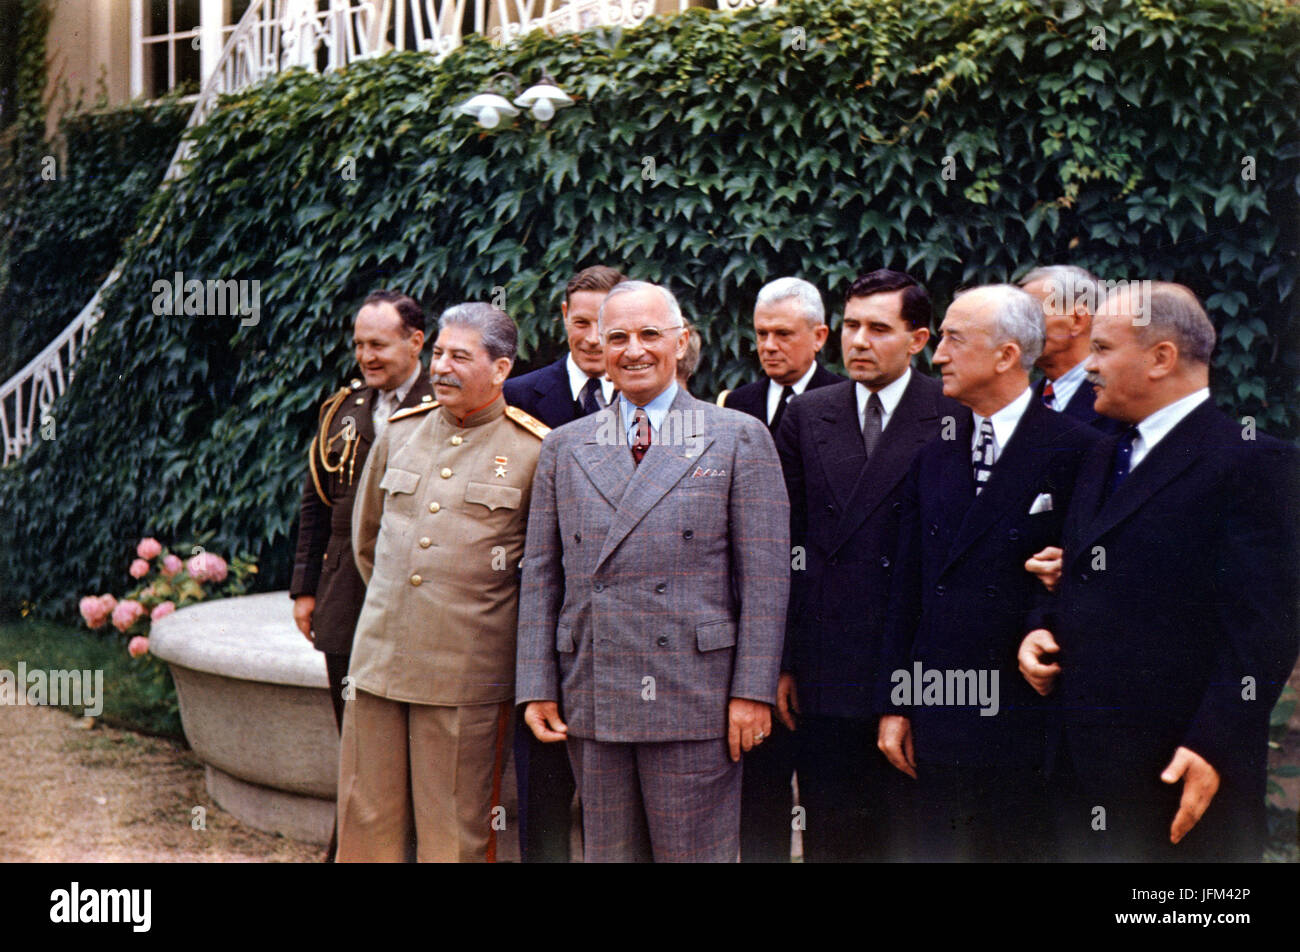 United States President Harry S. Truman (center) and Russia's Joseph Stalin meet at Potsdam. Left to Right, Row 1: Stalin, Truman, Soviet Ambassador Andrei Gromyko, Secretary of State James Byrnes, and Stock Photo